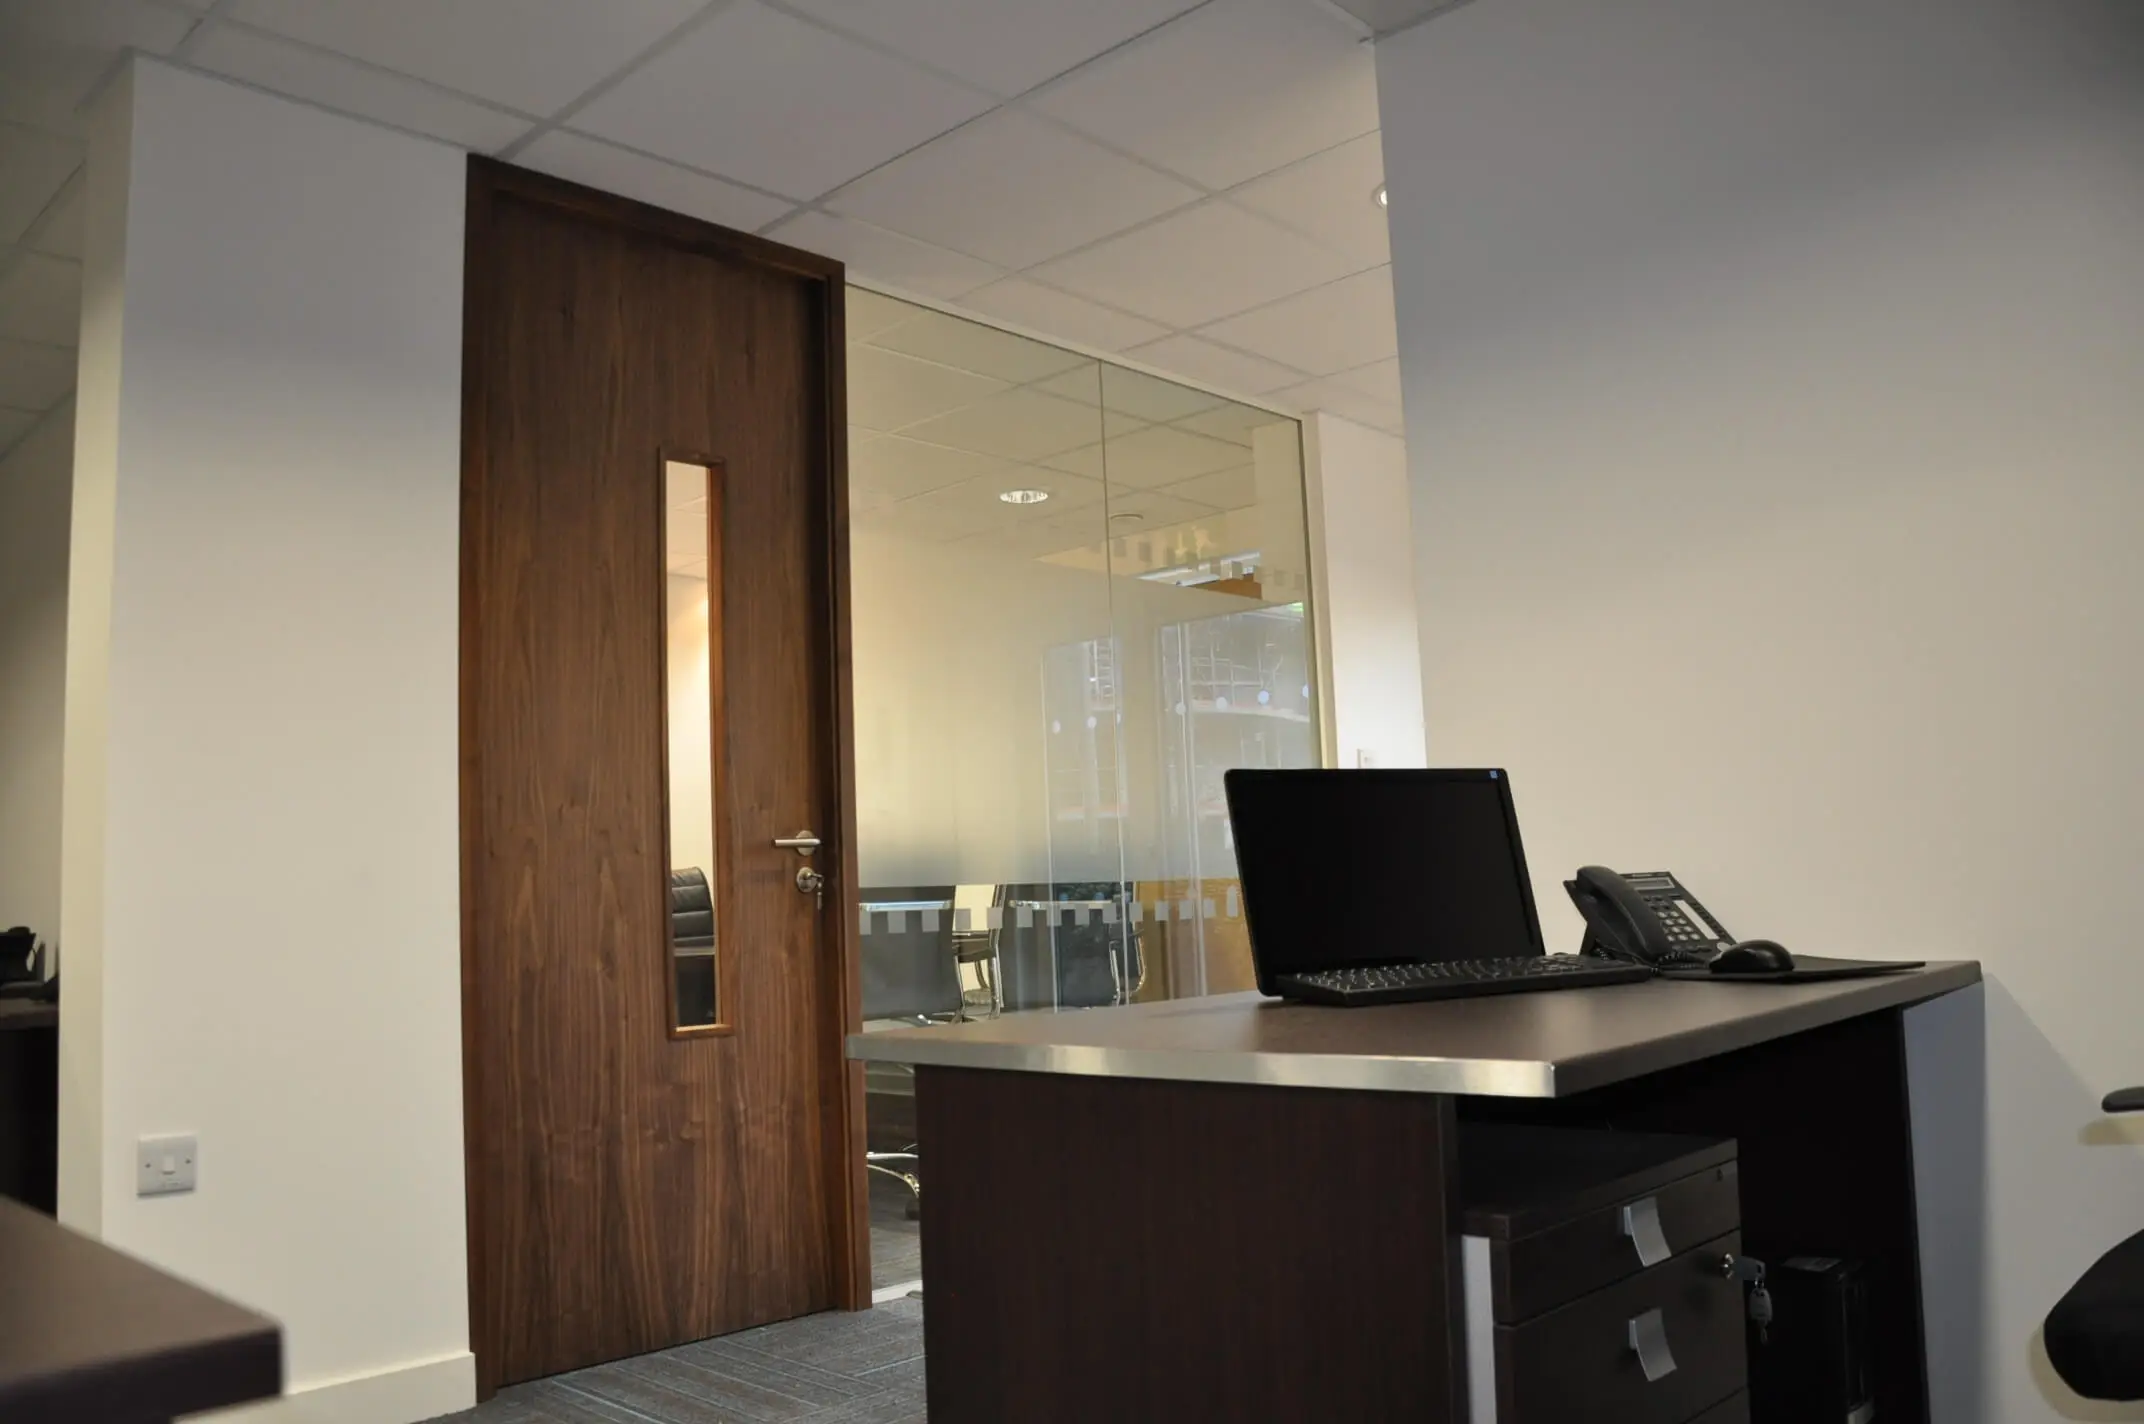 Office partitions with solid wood doors in executive office